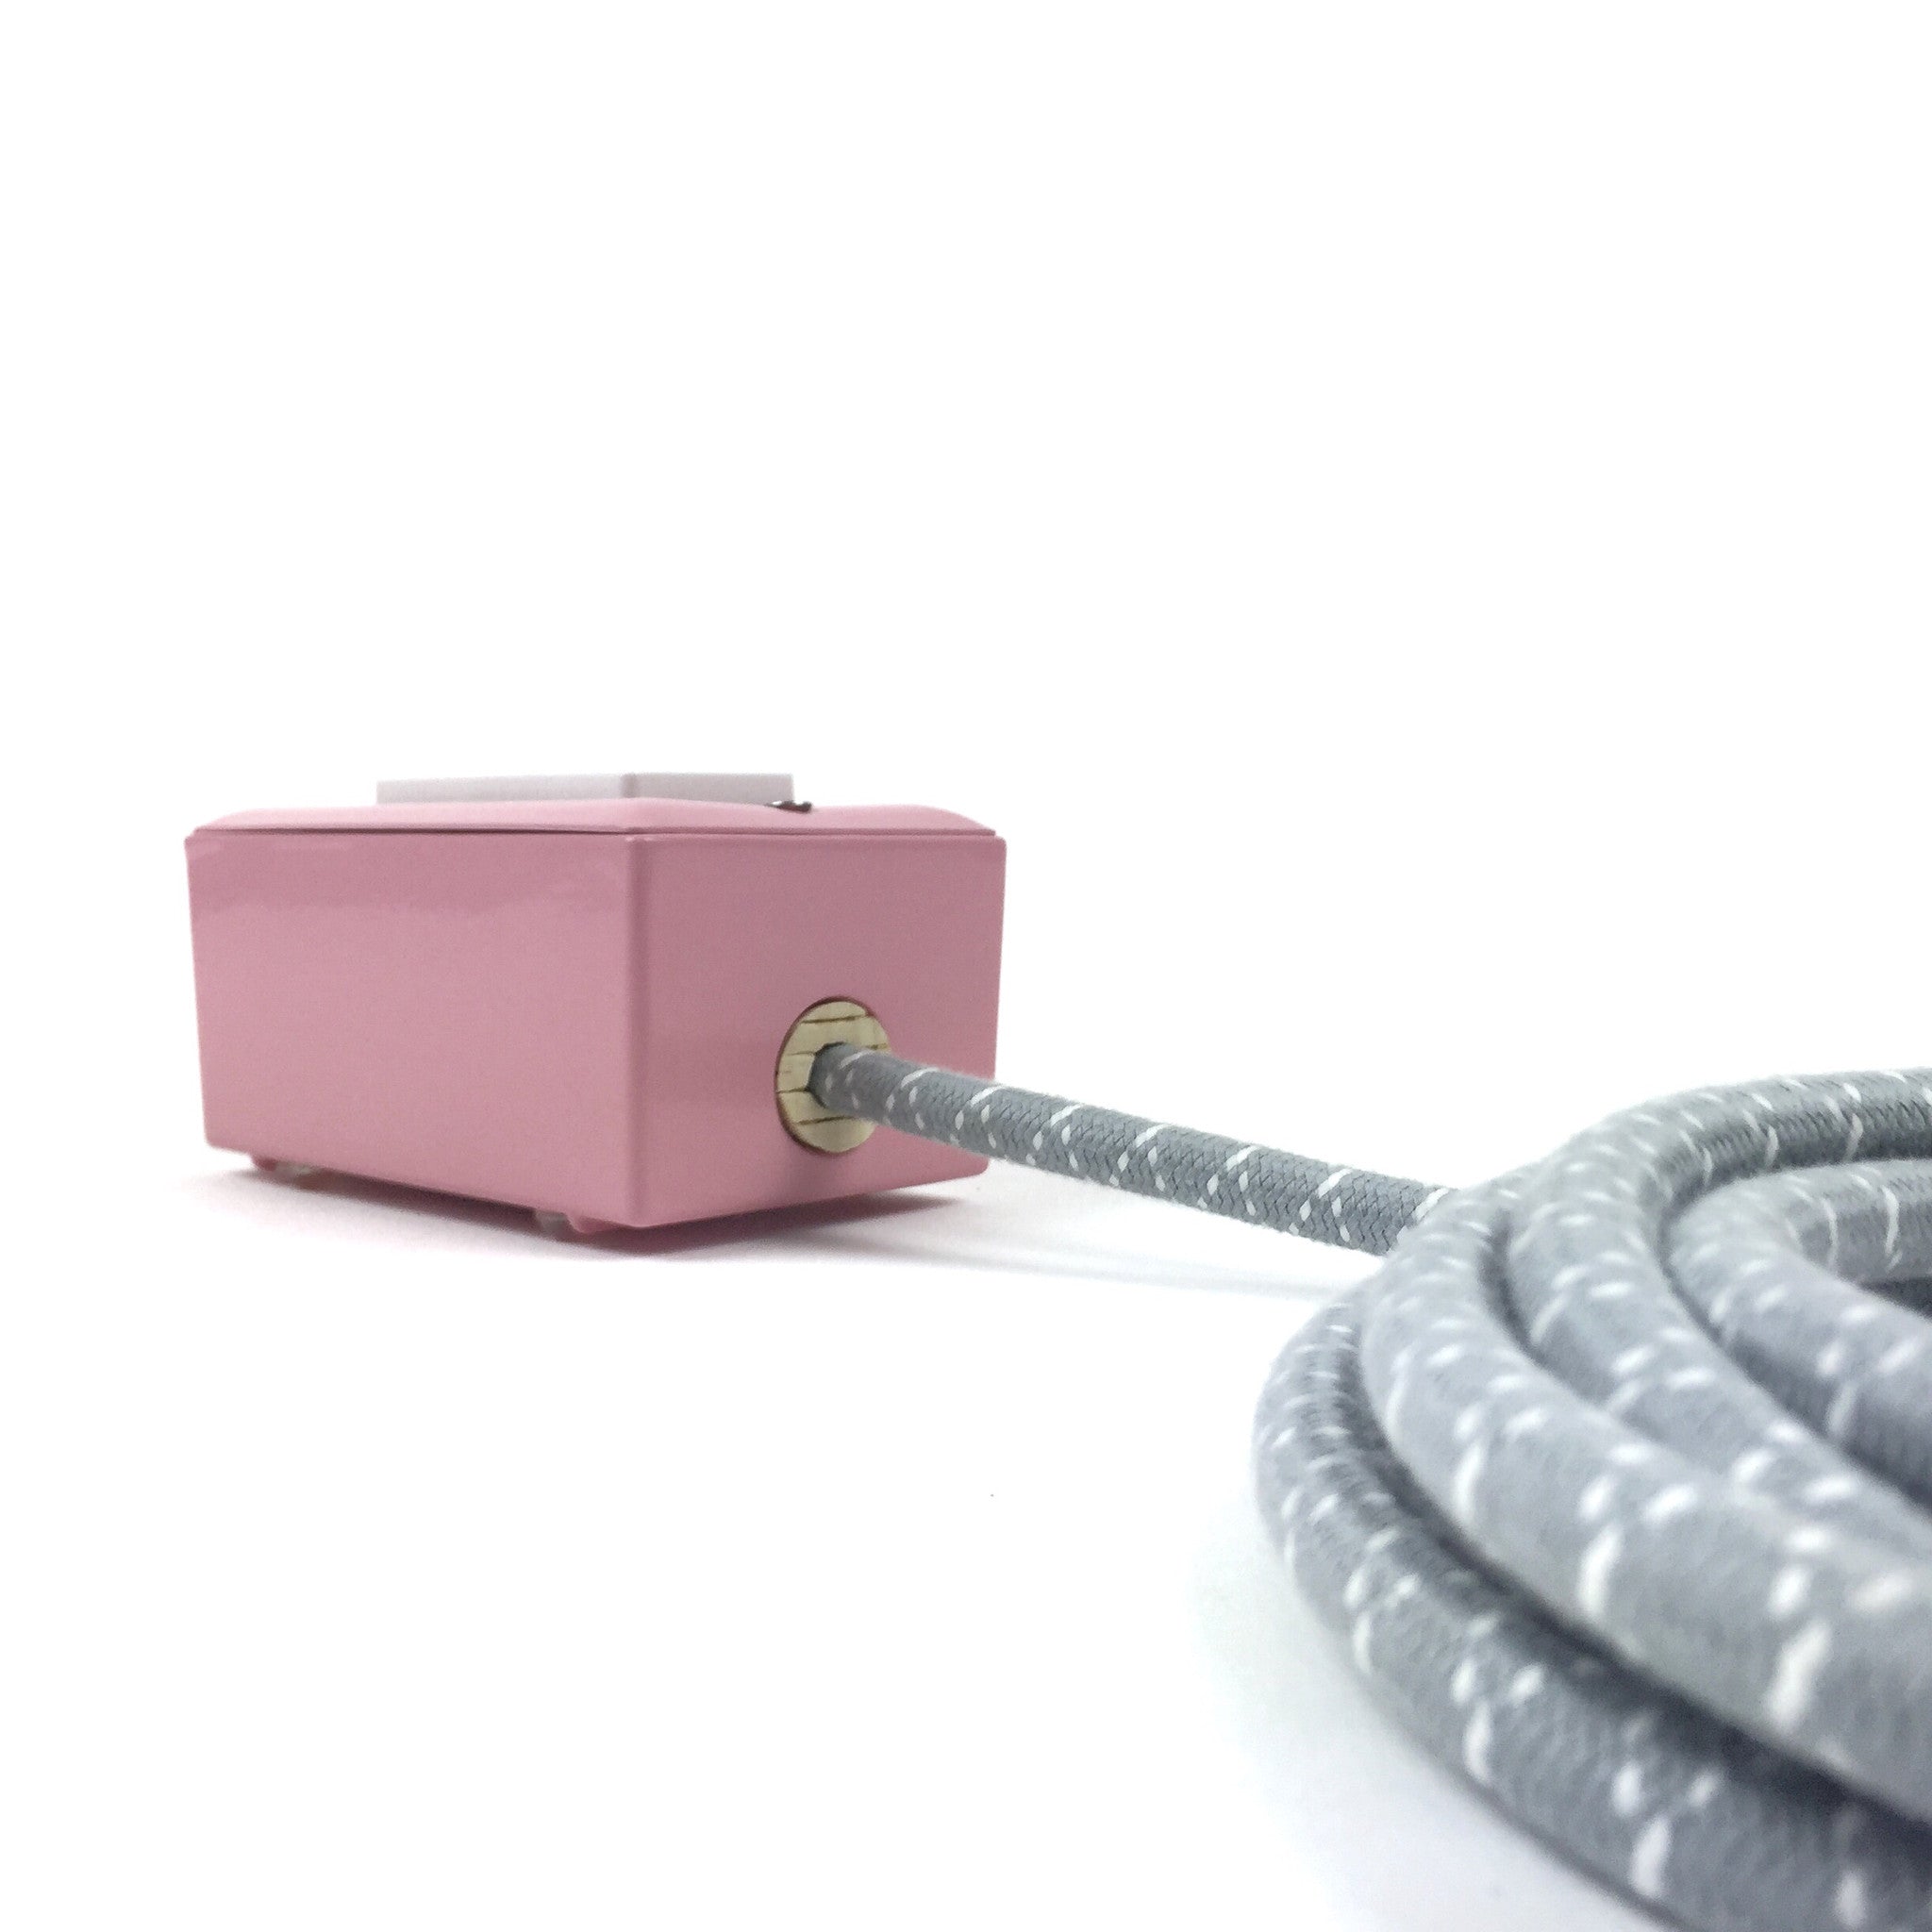 The First Smart Chip Extension Cord - 12' Extō Dual-USB, Dual-Outlet - Candy Pink